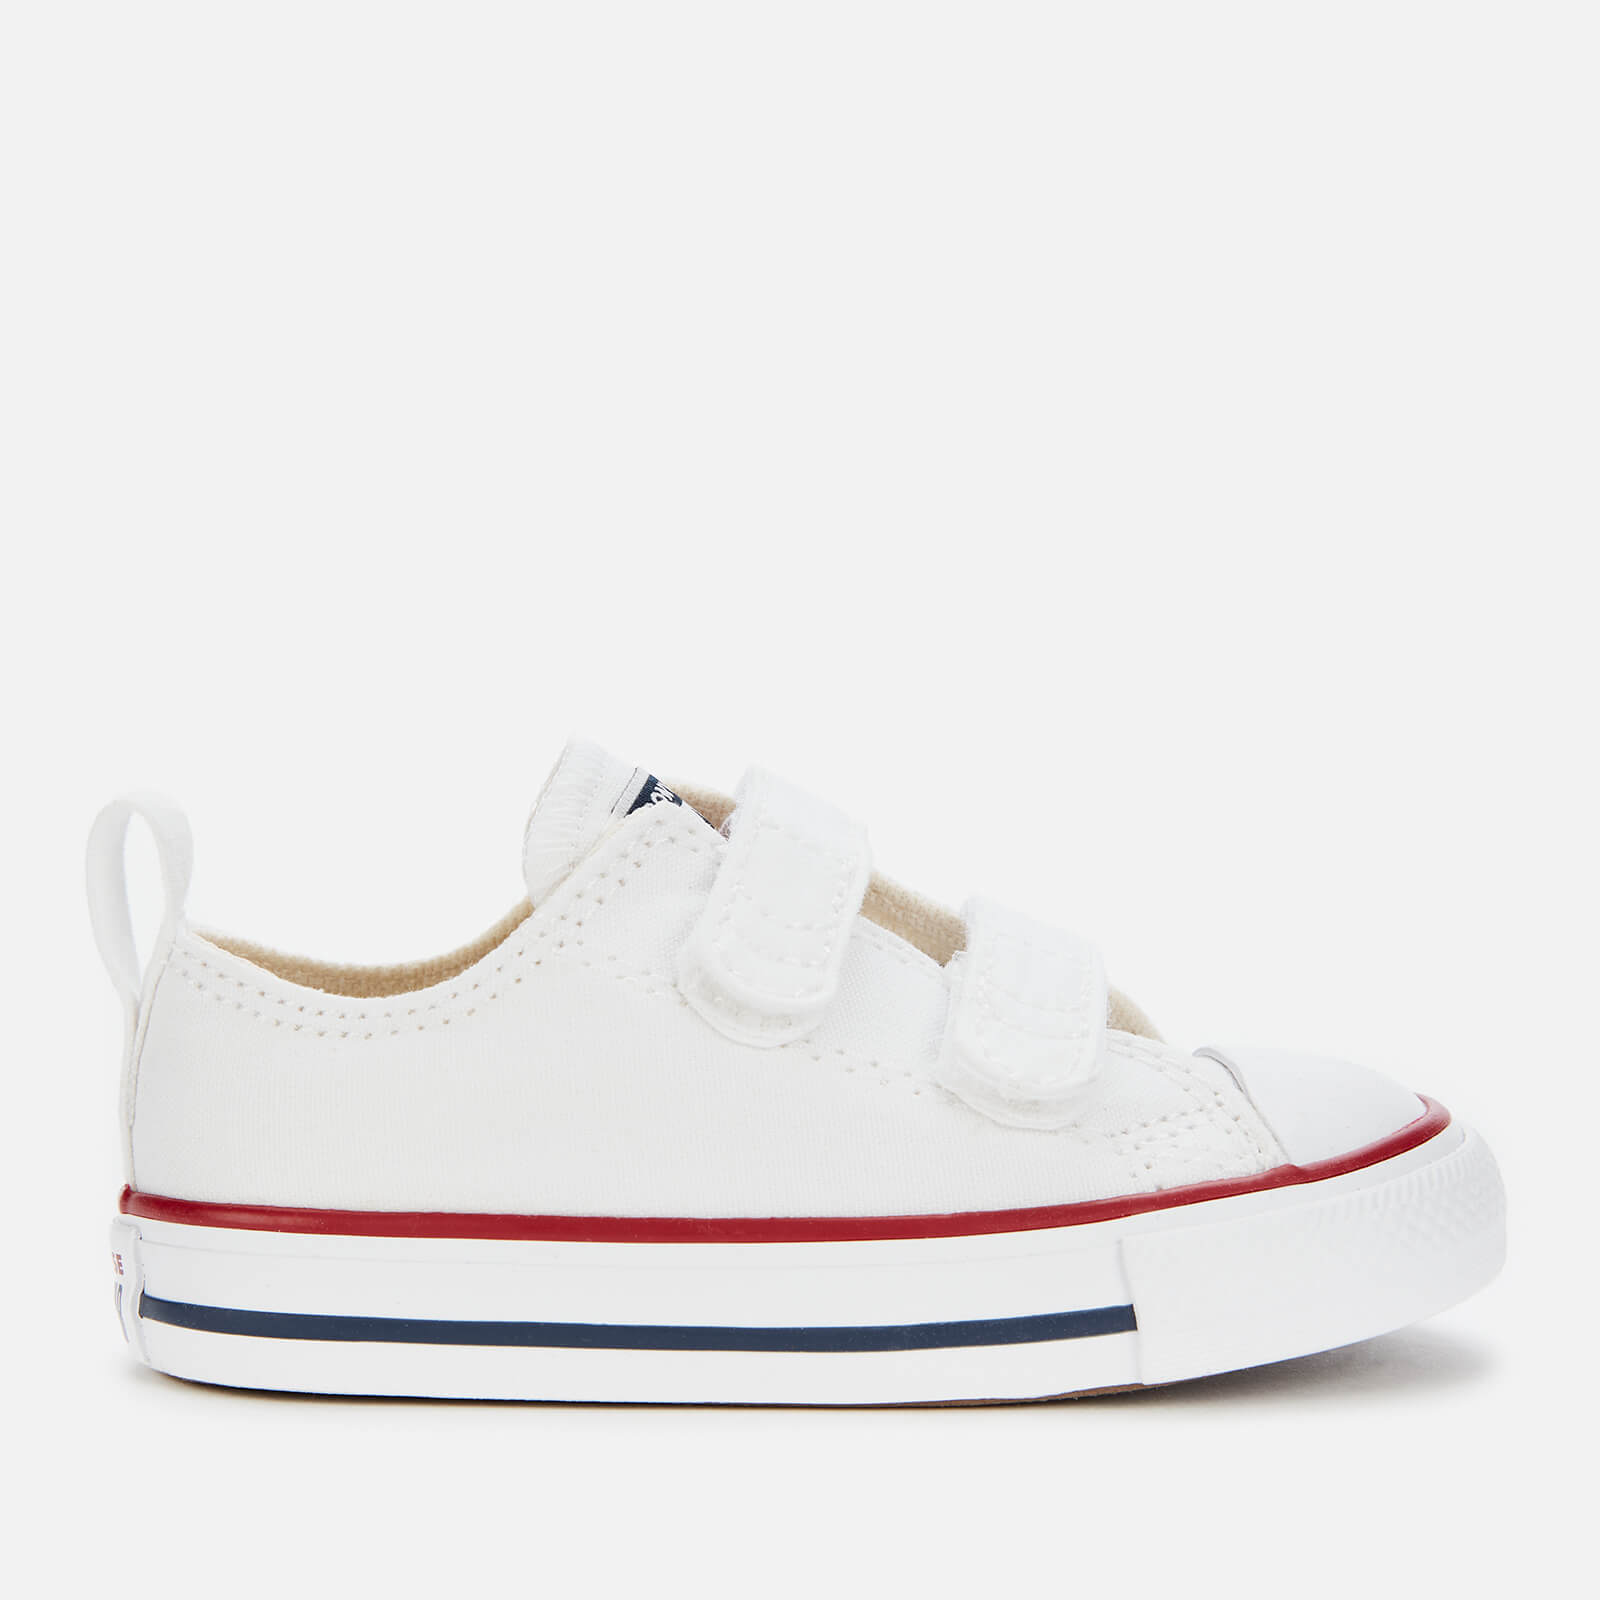 Converse Toddlers' Chuck Taylor All Star Ox Velcro Trainers - White - UK 4 Baby